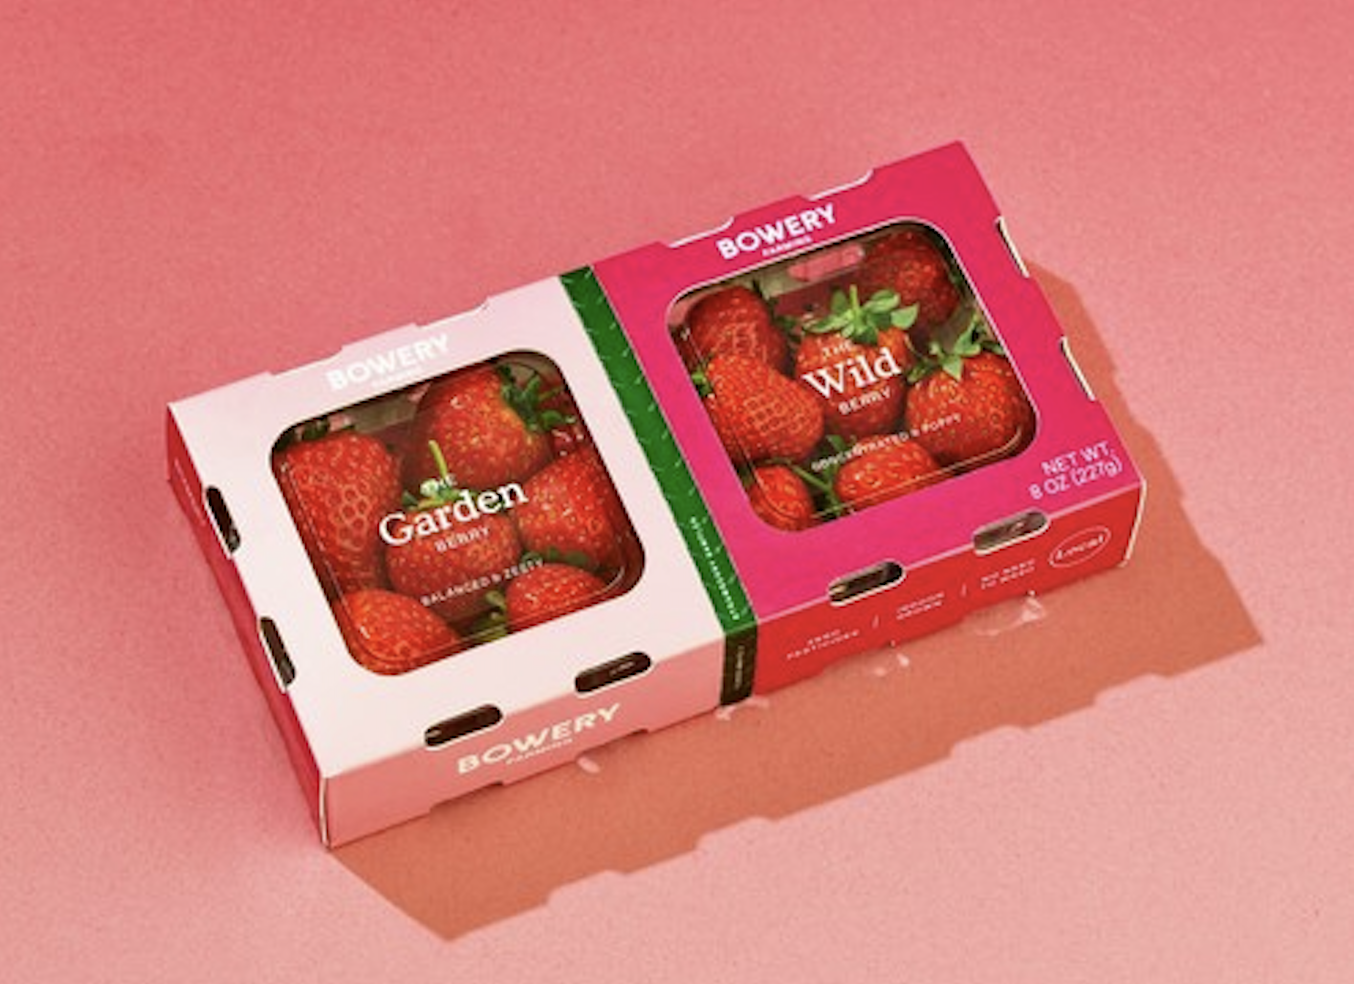 Bowery is selling vertically farmed strawberries in limited quantities